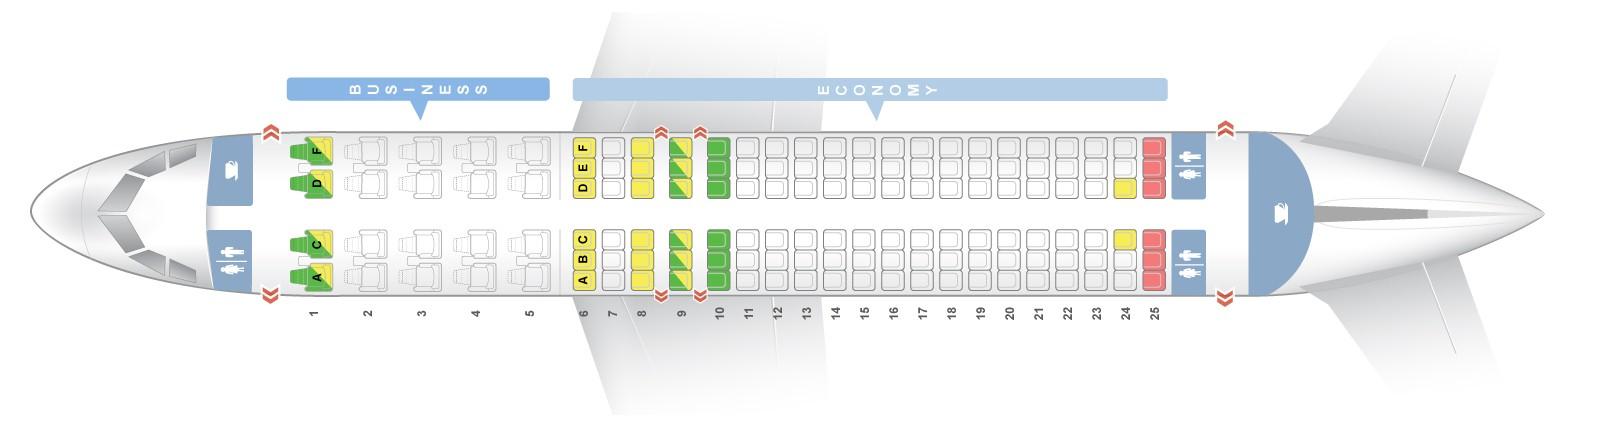 Seat Map Airbus A320 200 Air India Best Seats In The Plane